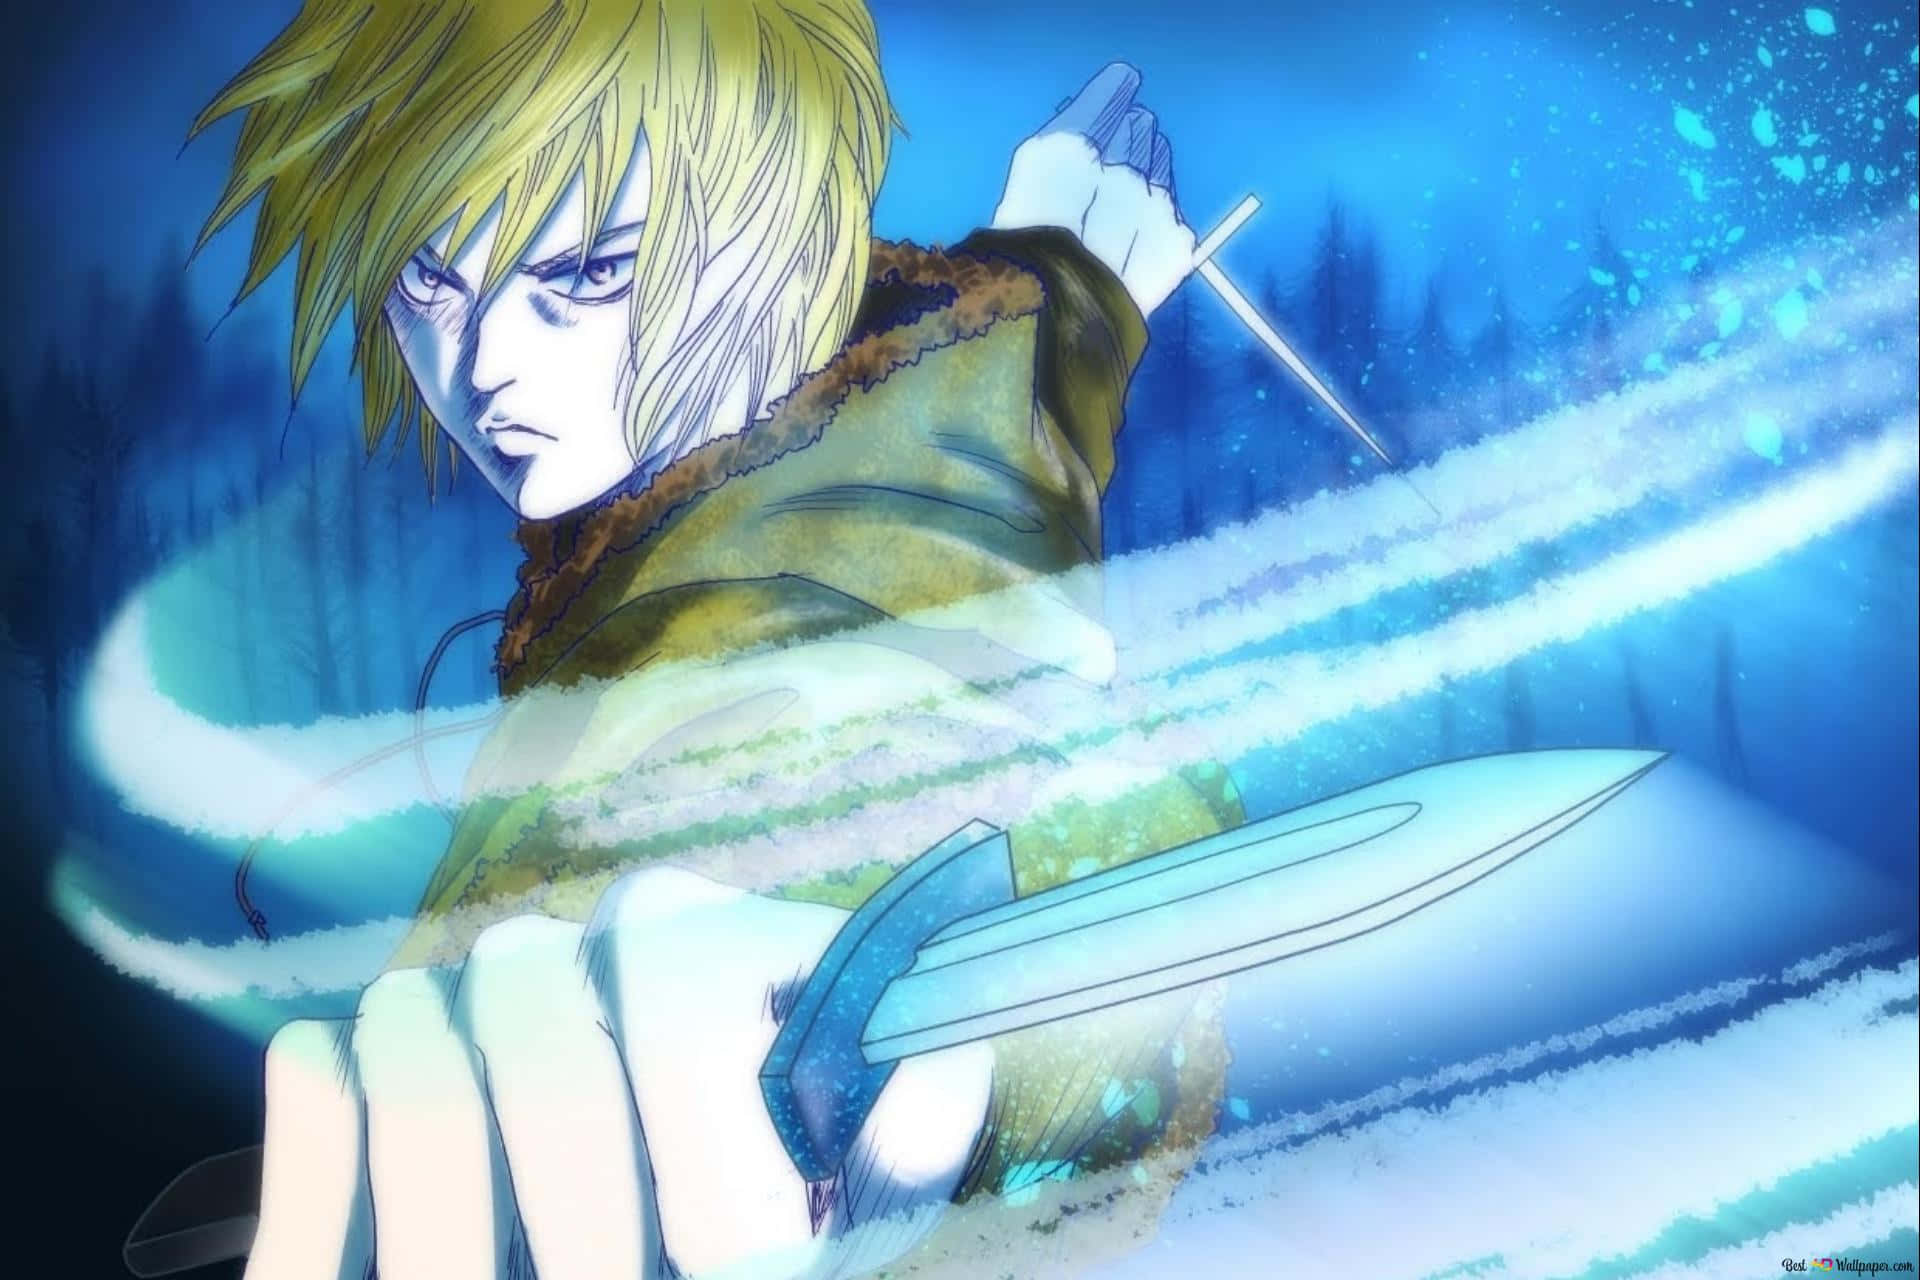 A team of brave warriors begin the pillars of their long and arduous journey in Vinland Saga.